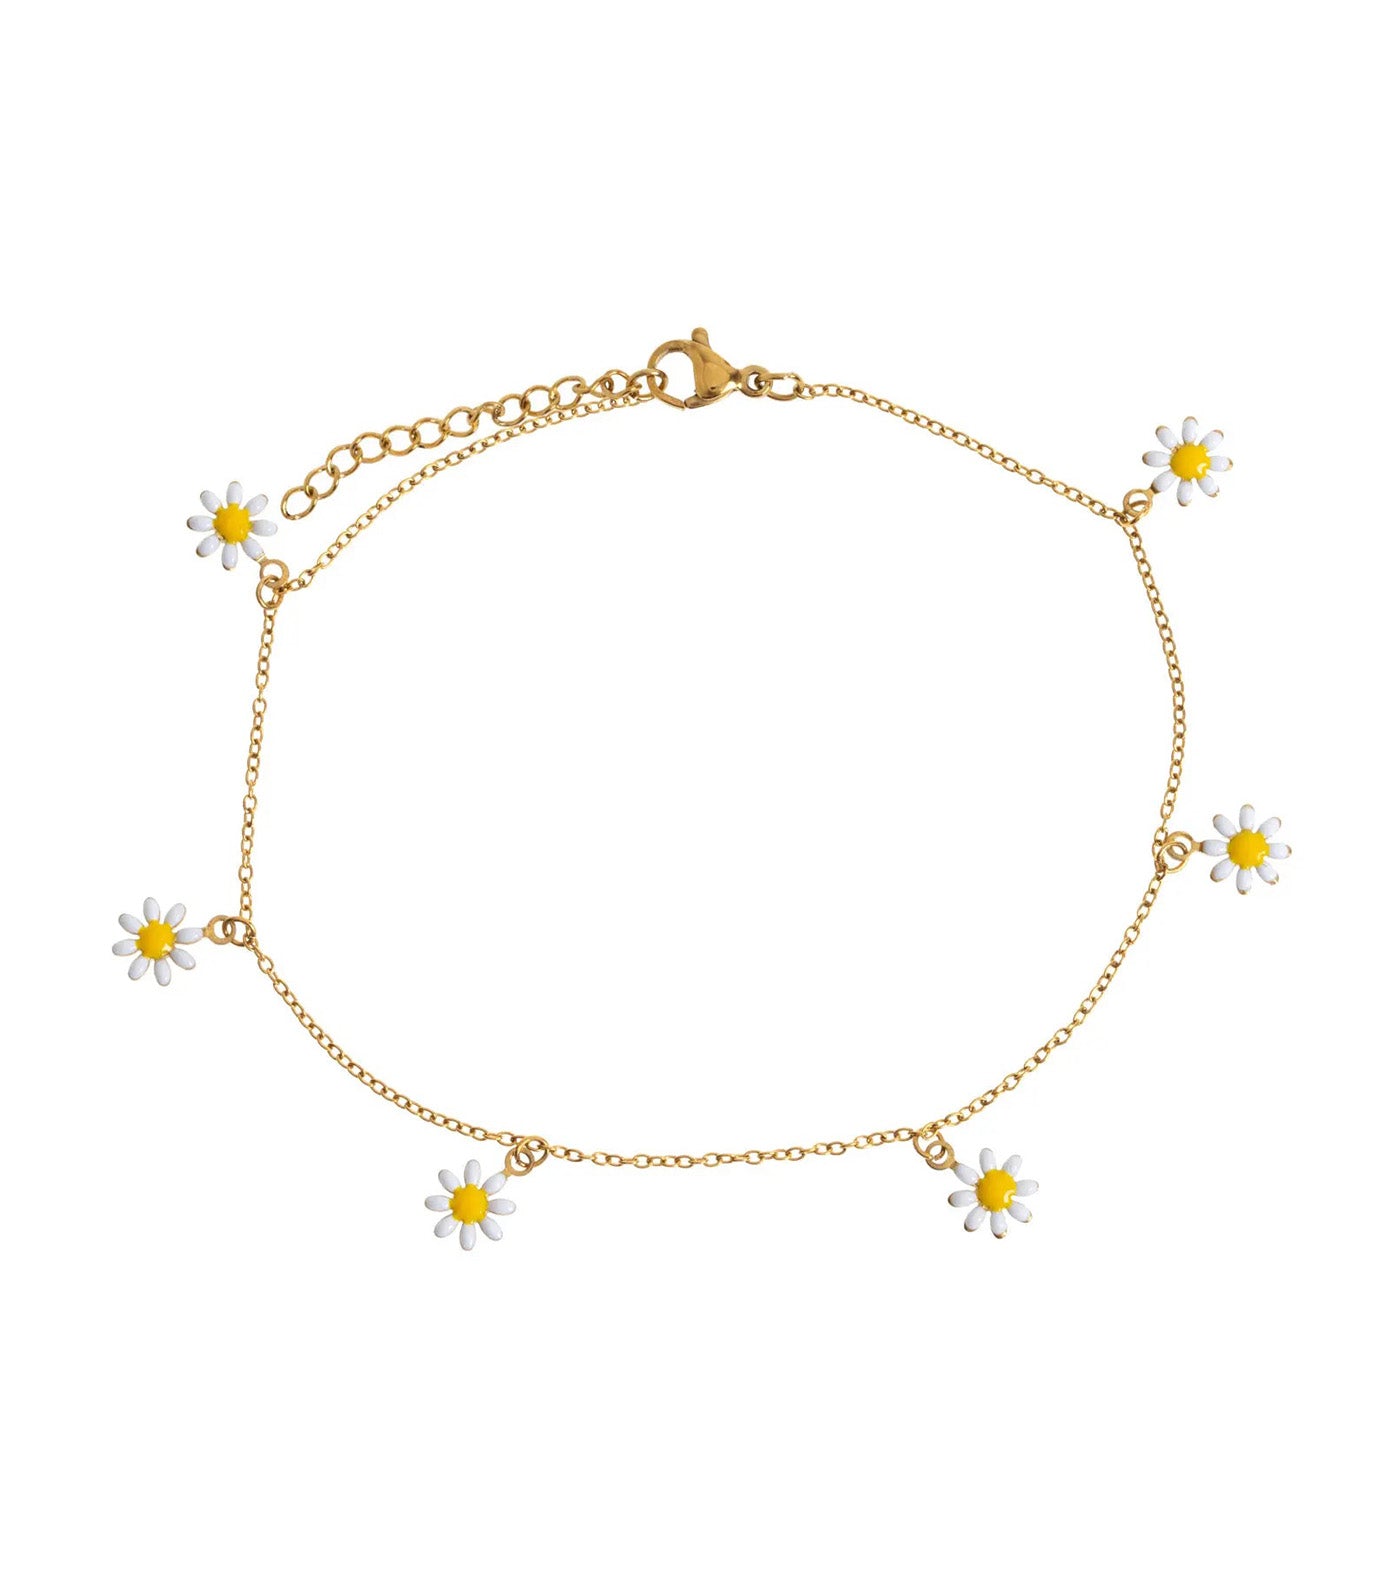 Astrid Daisy Flowers Anklet Stainless Steel Gold